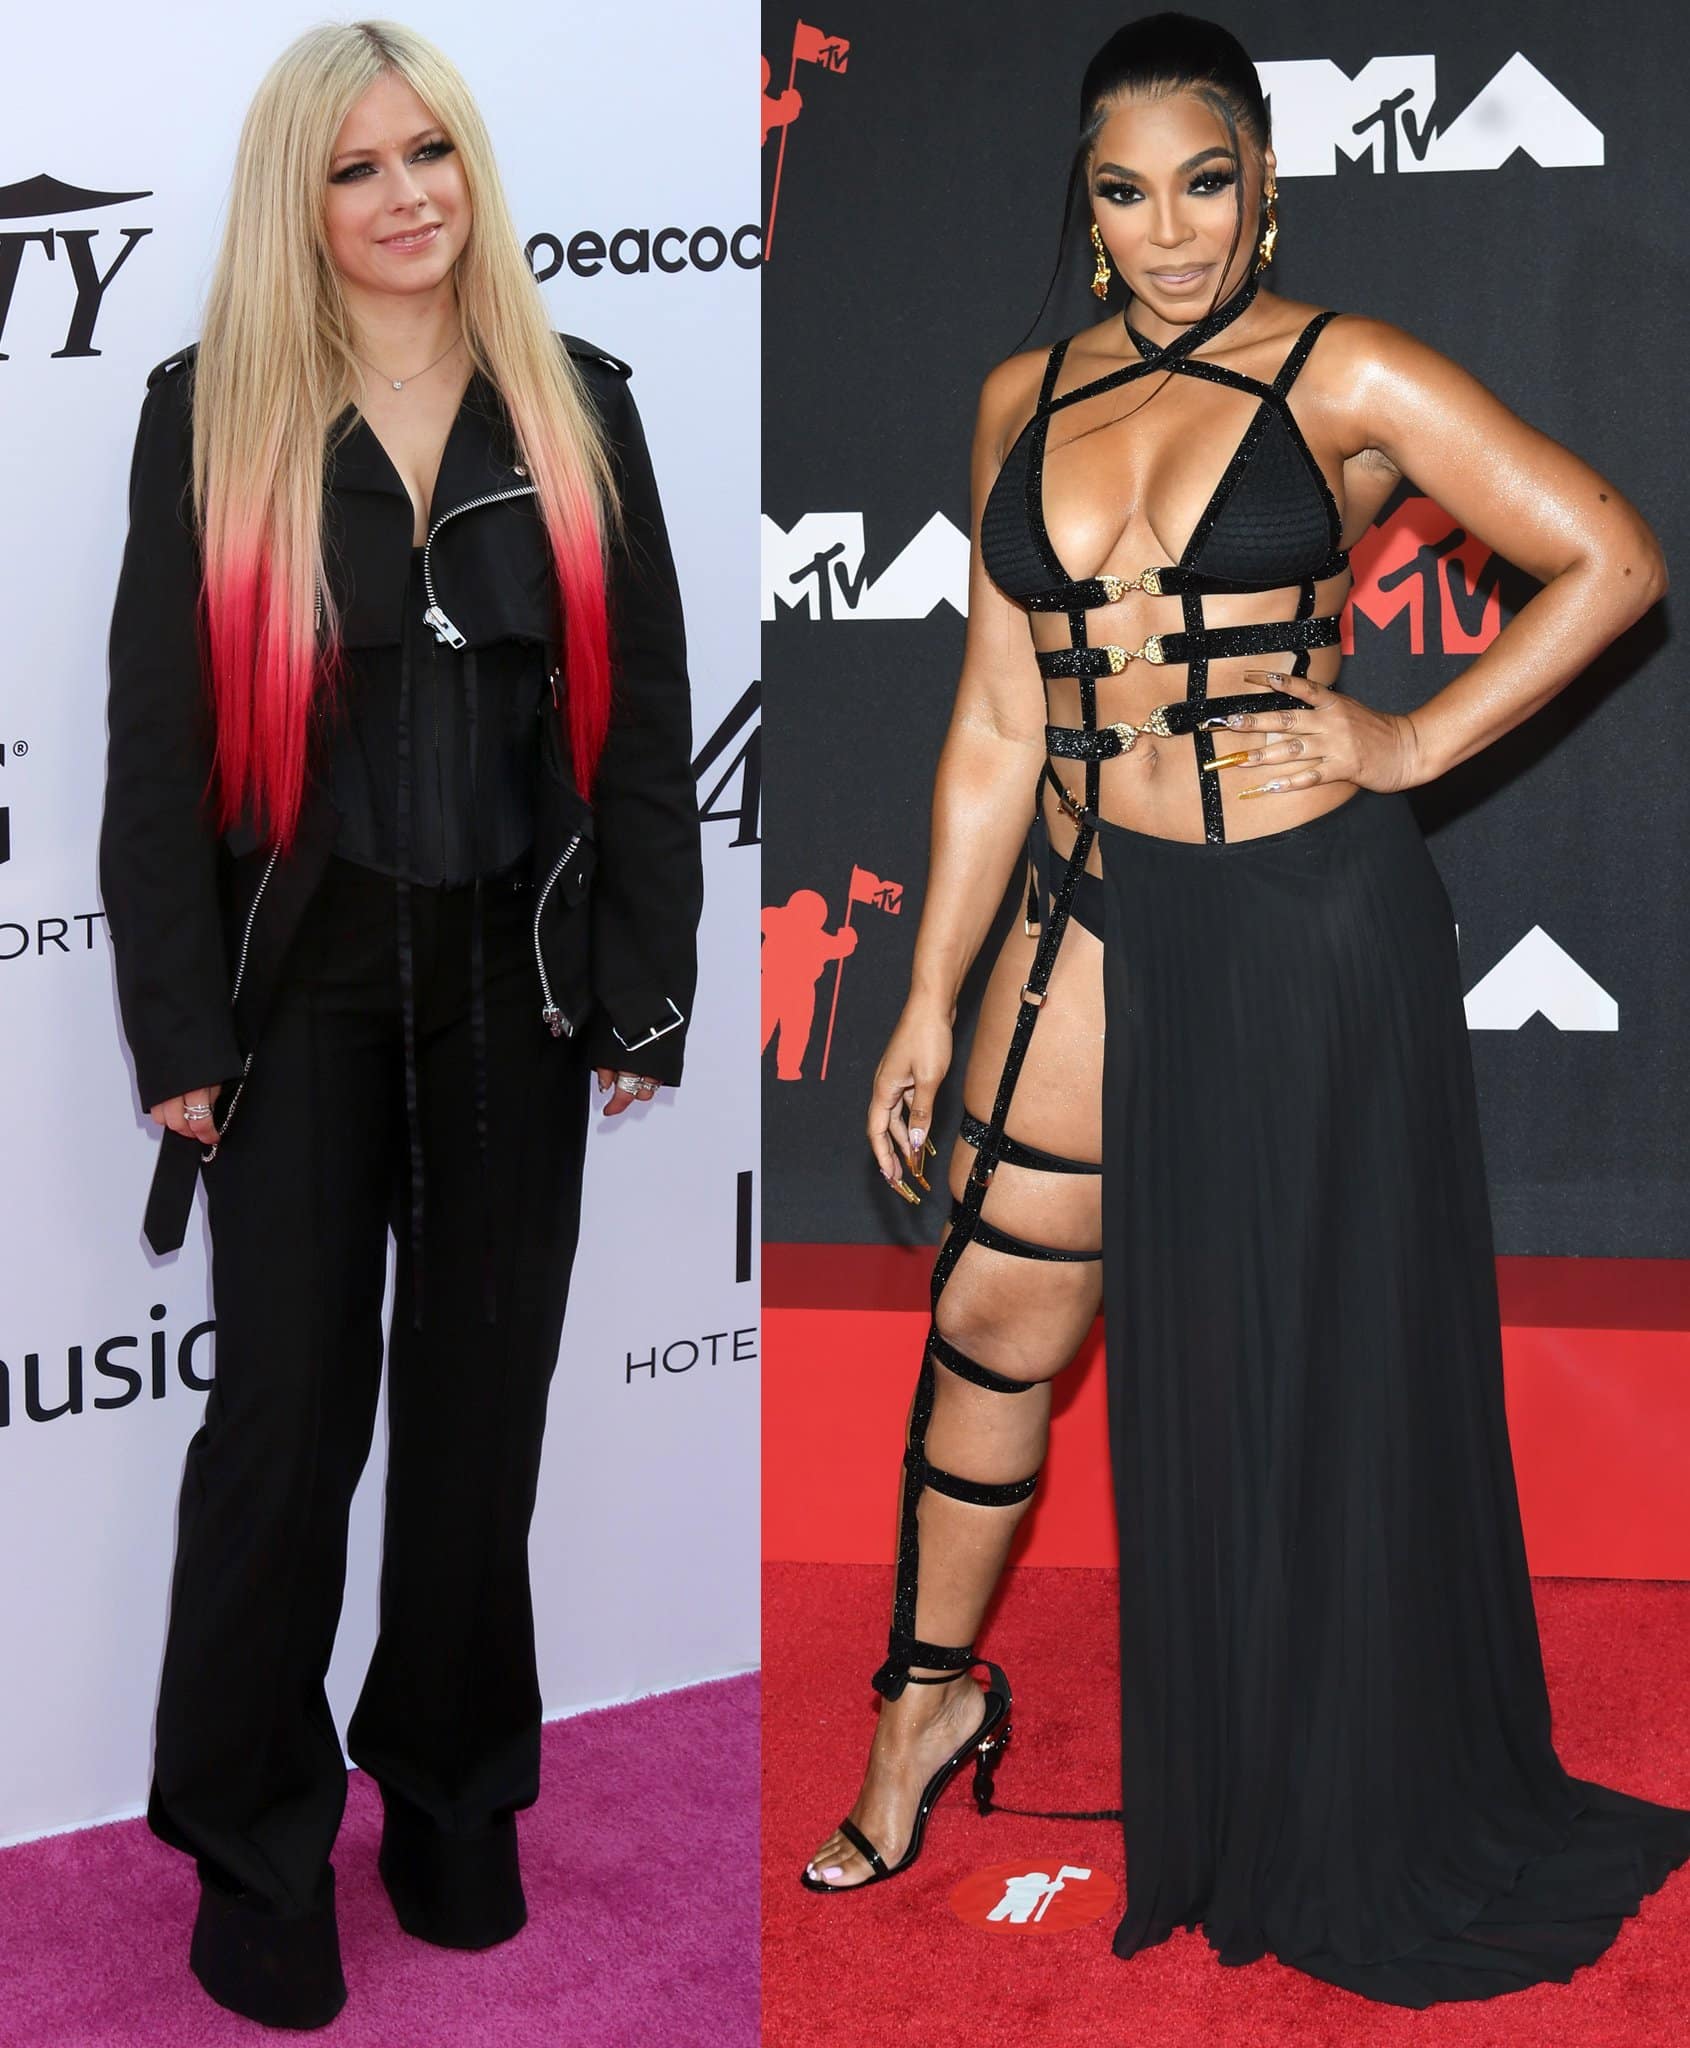 Aside from Ariana and Lady Gaga, Avril Lavigne and Ashanti are two other famous short singers